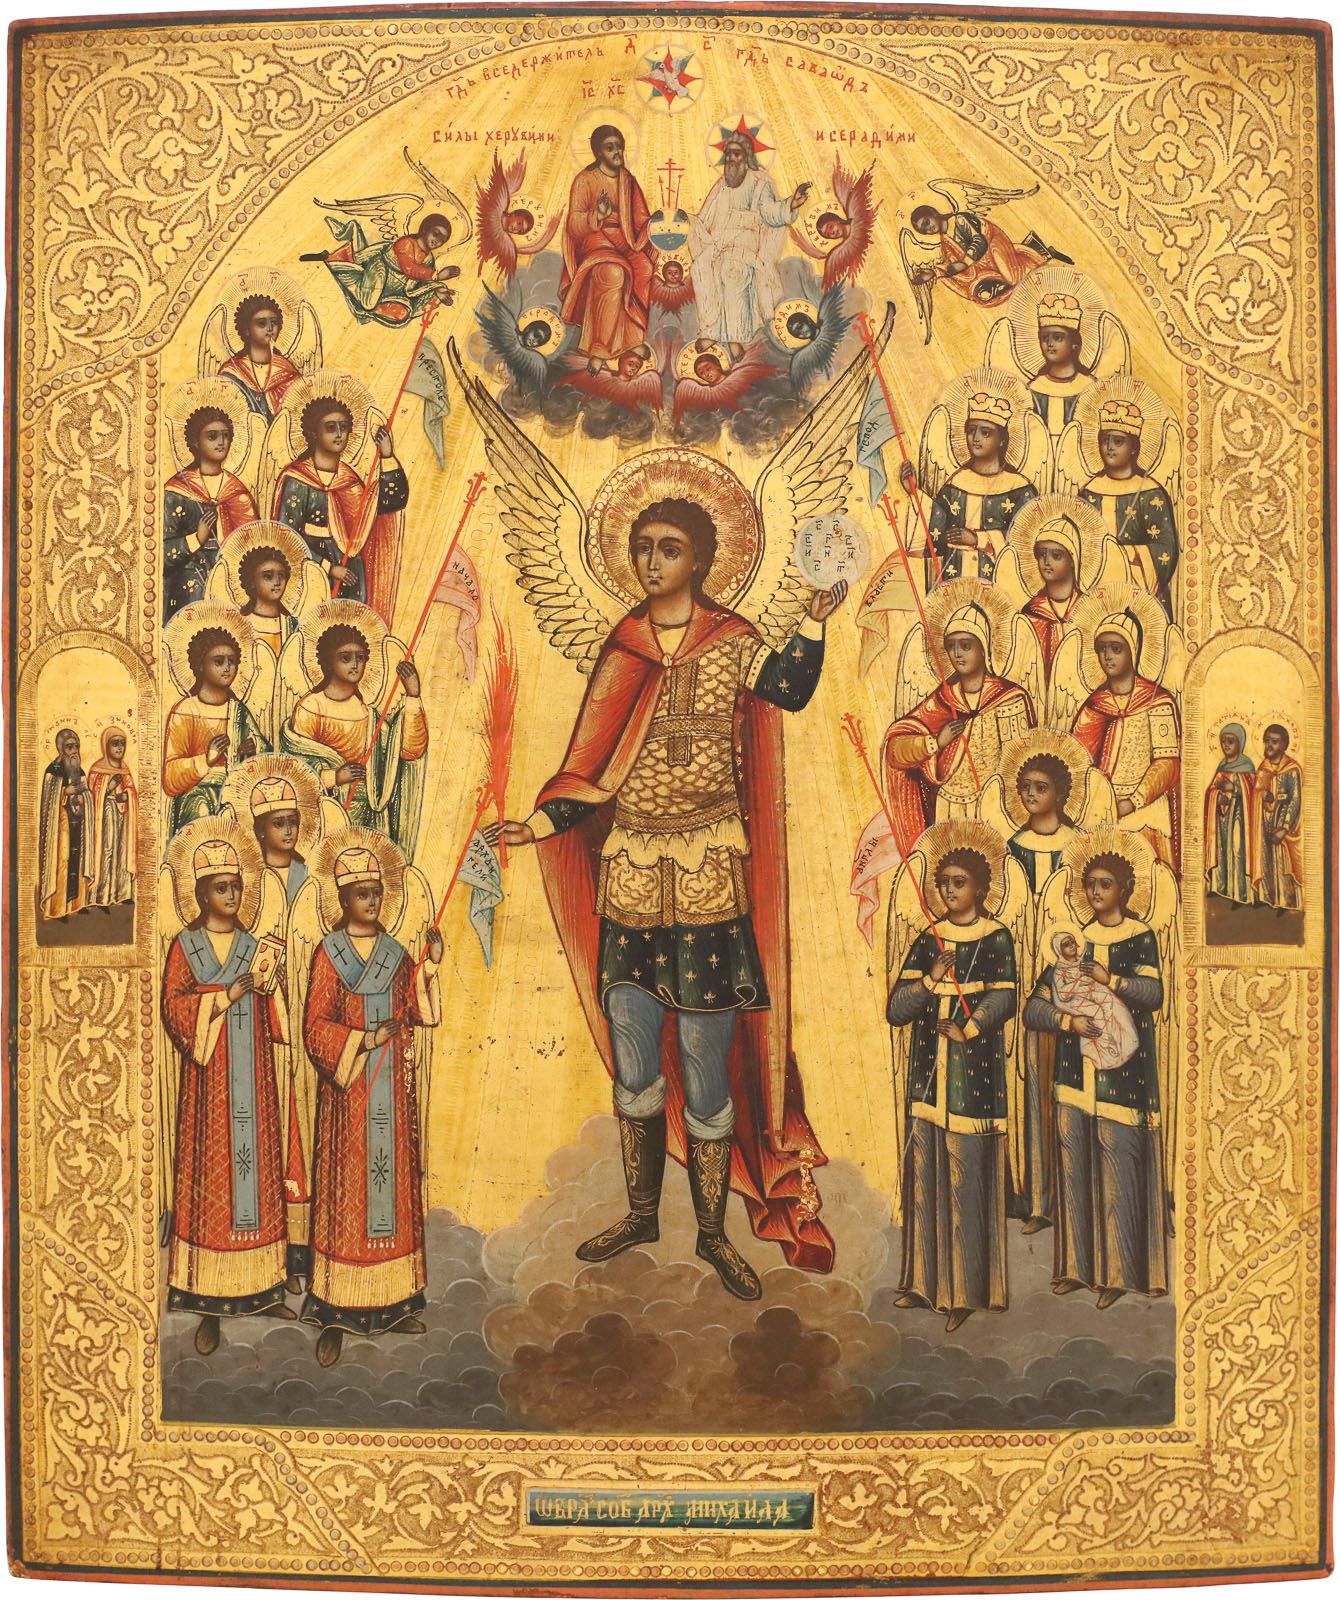 AN ICON SHOWING THE ARCHANGEL MICHAEL AS LEADER OF THE ANGE * UN ICONO QUE MUEST&hellip;